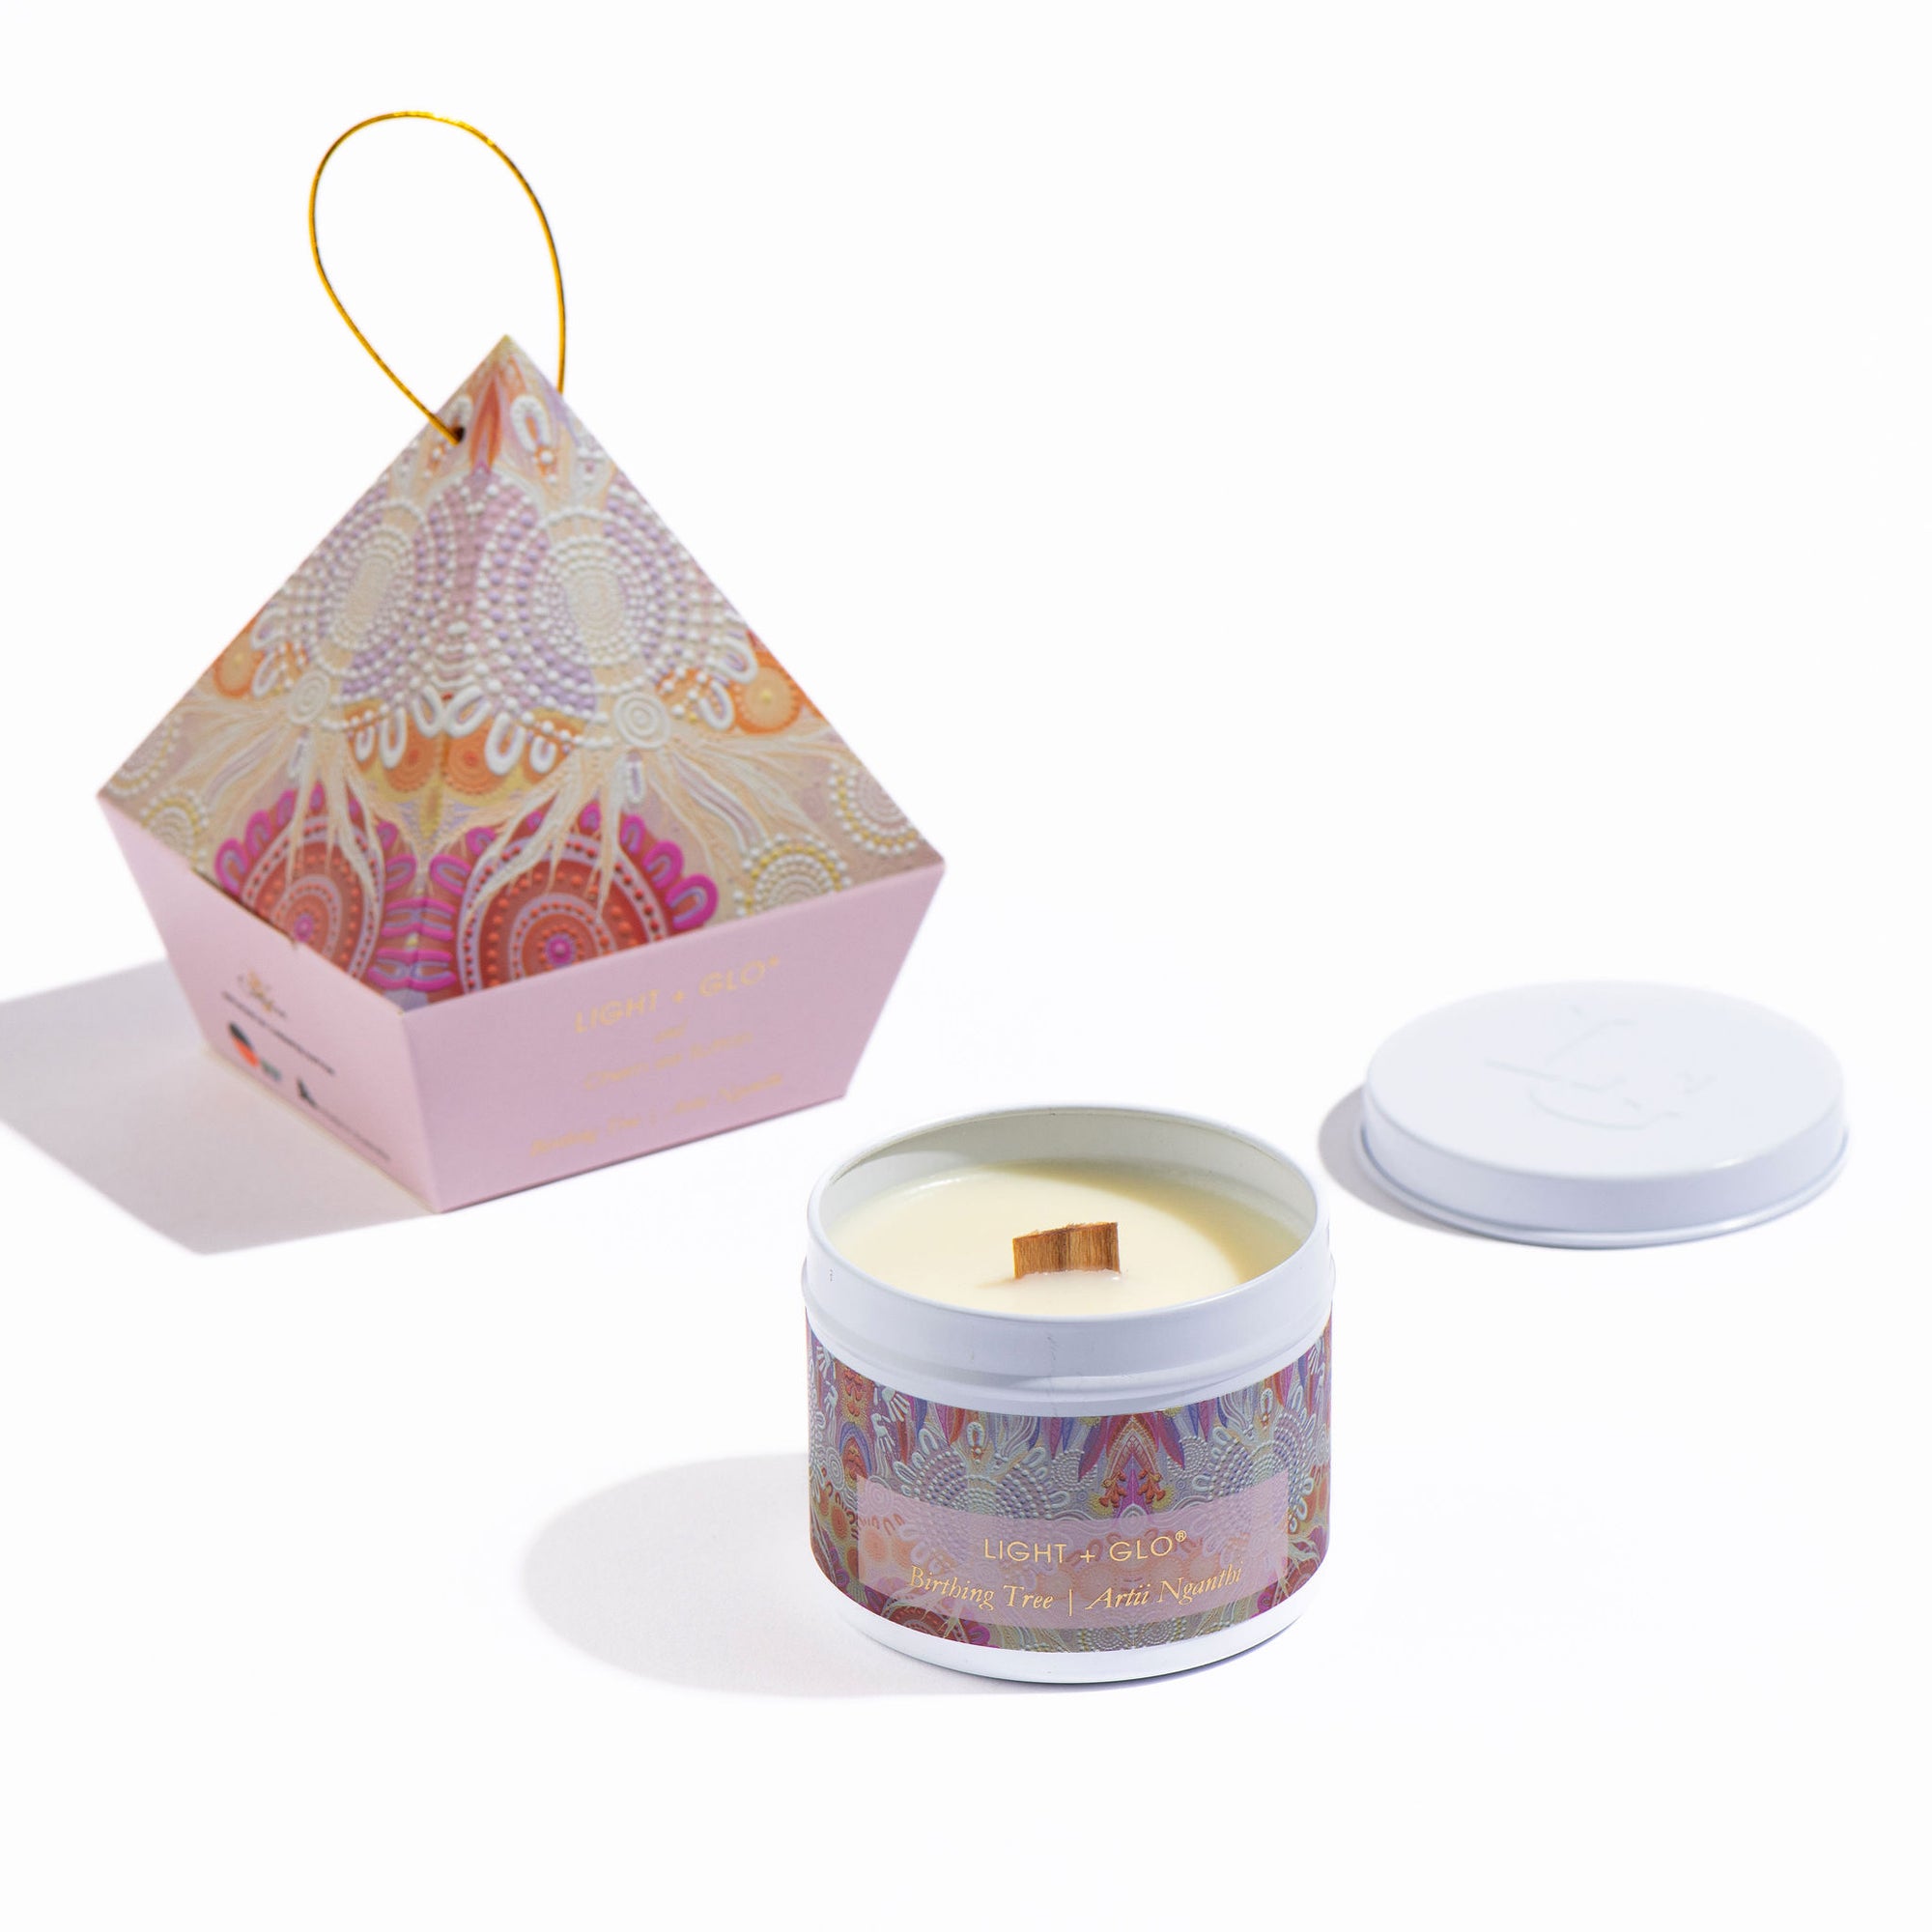 Chern'ee Sutton - Birthing Tree Bauble Limited Edition Candle | Luxury Candles & Home Fragrances by Light + Glo